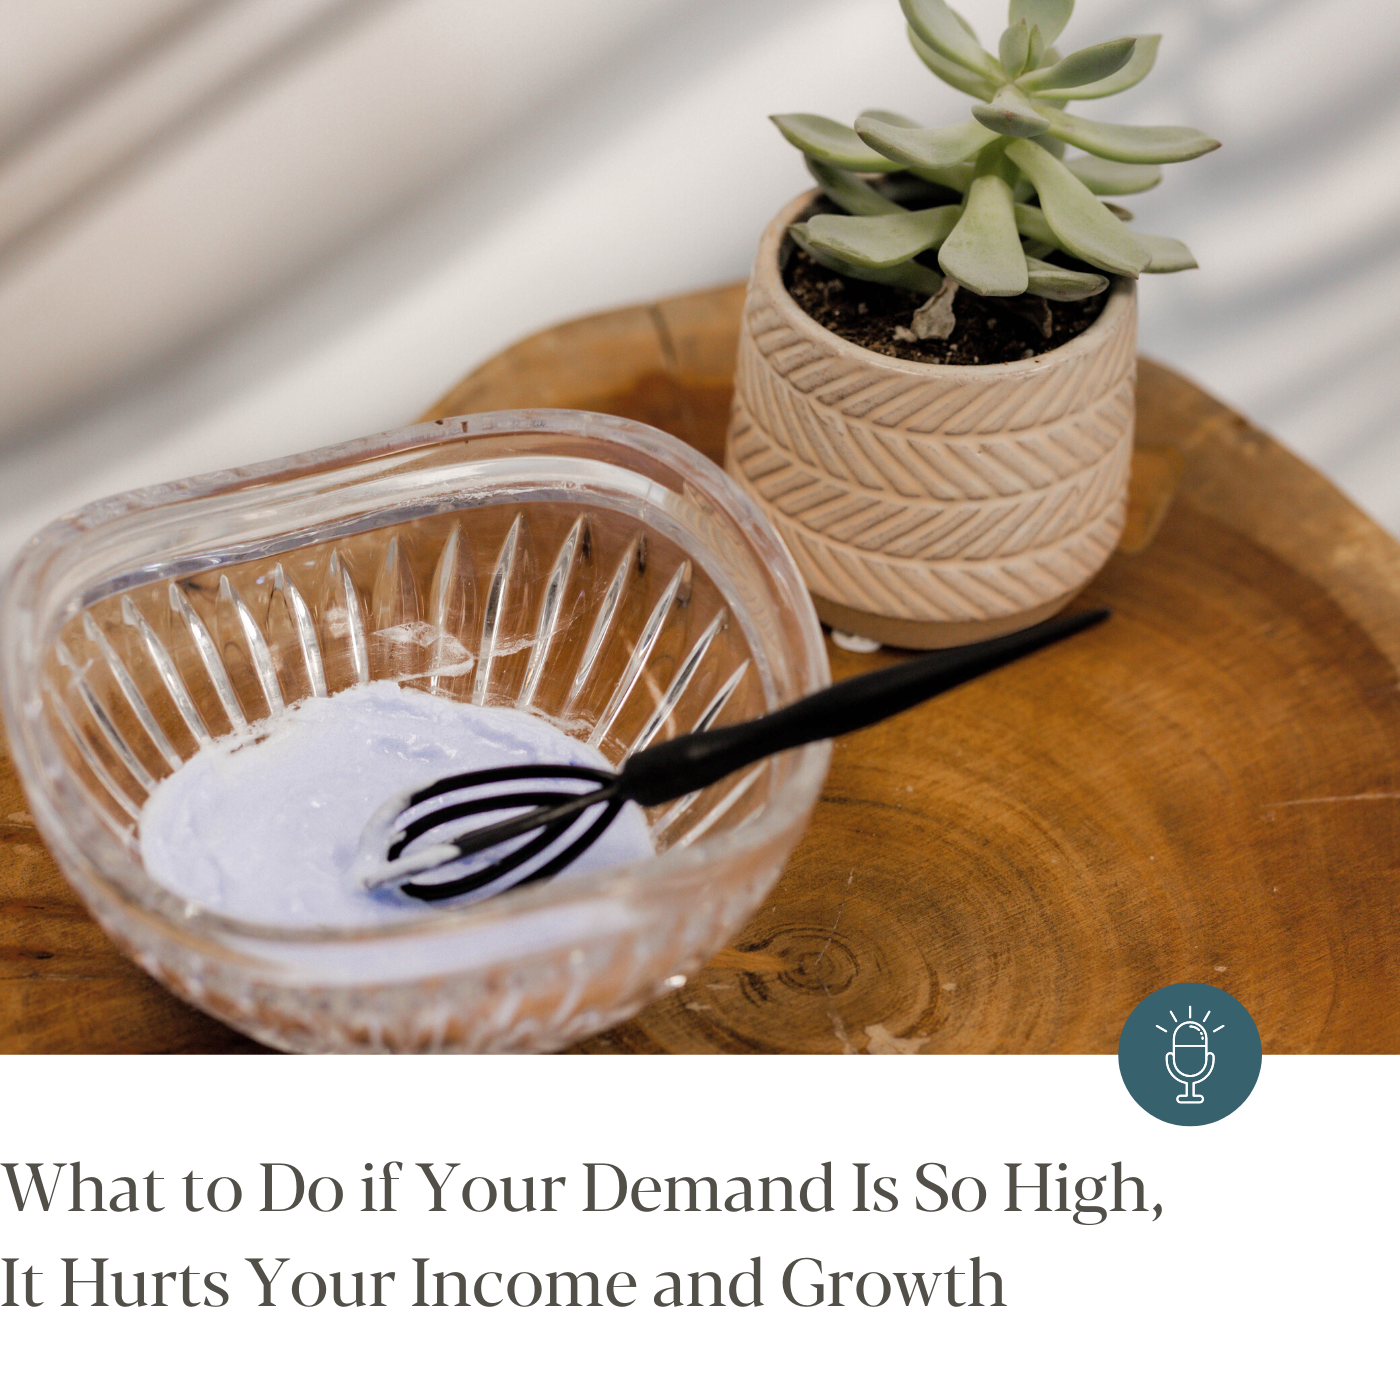 Episode #271 - What to Do If Your Demand is So High, It Hurts Your Income and Growth